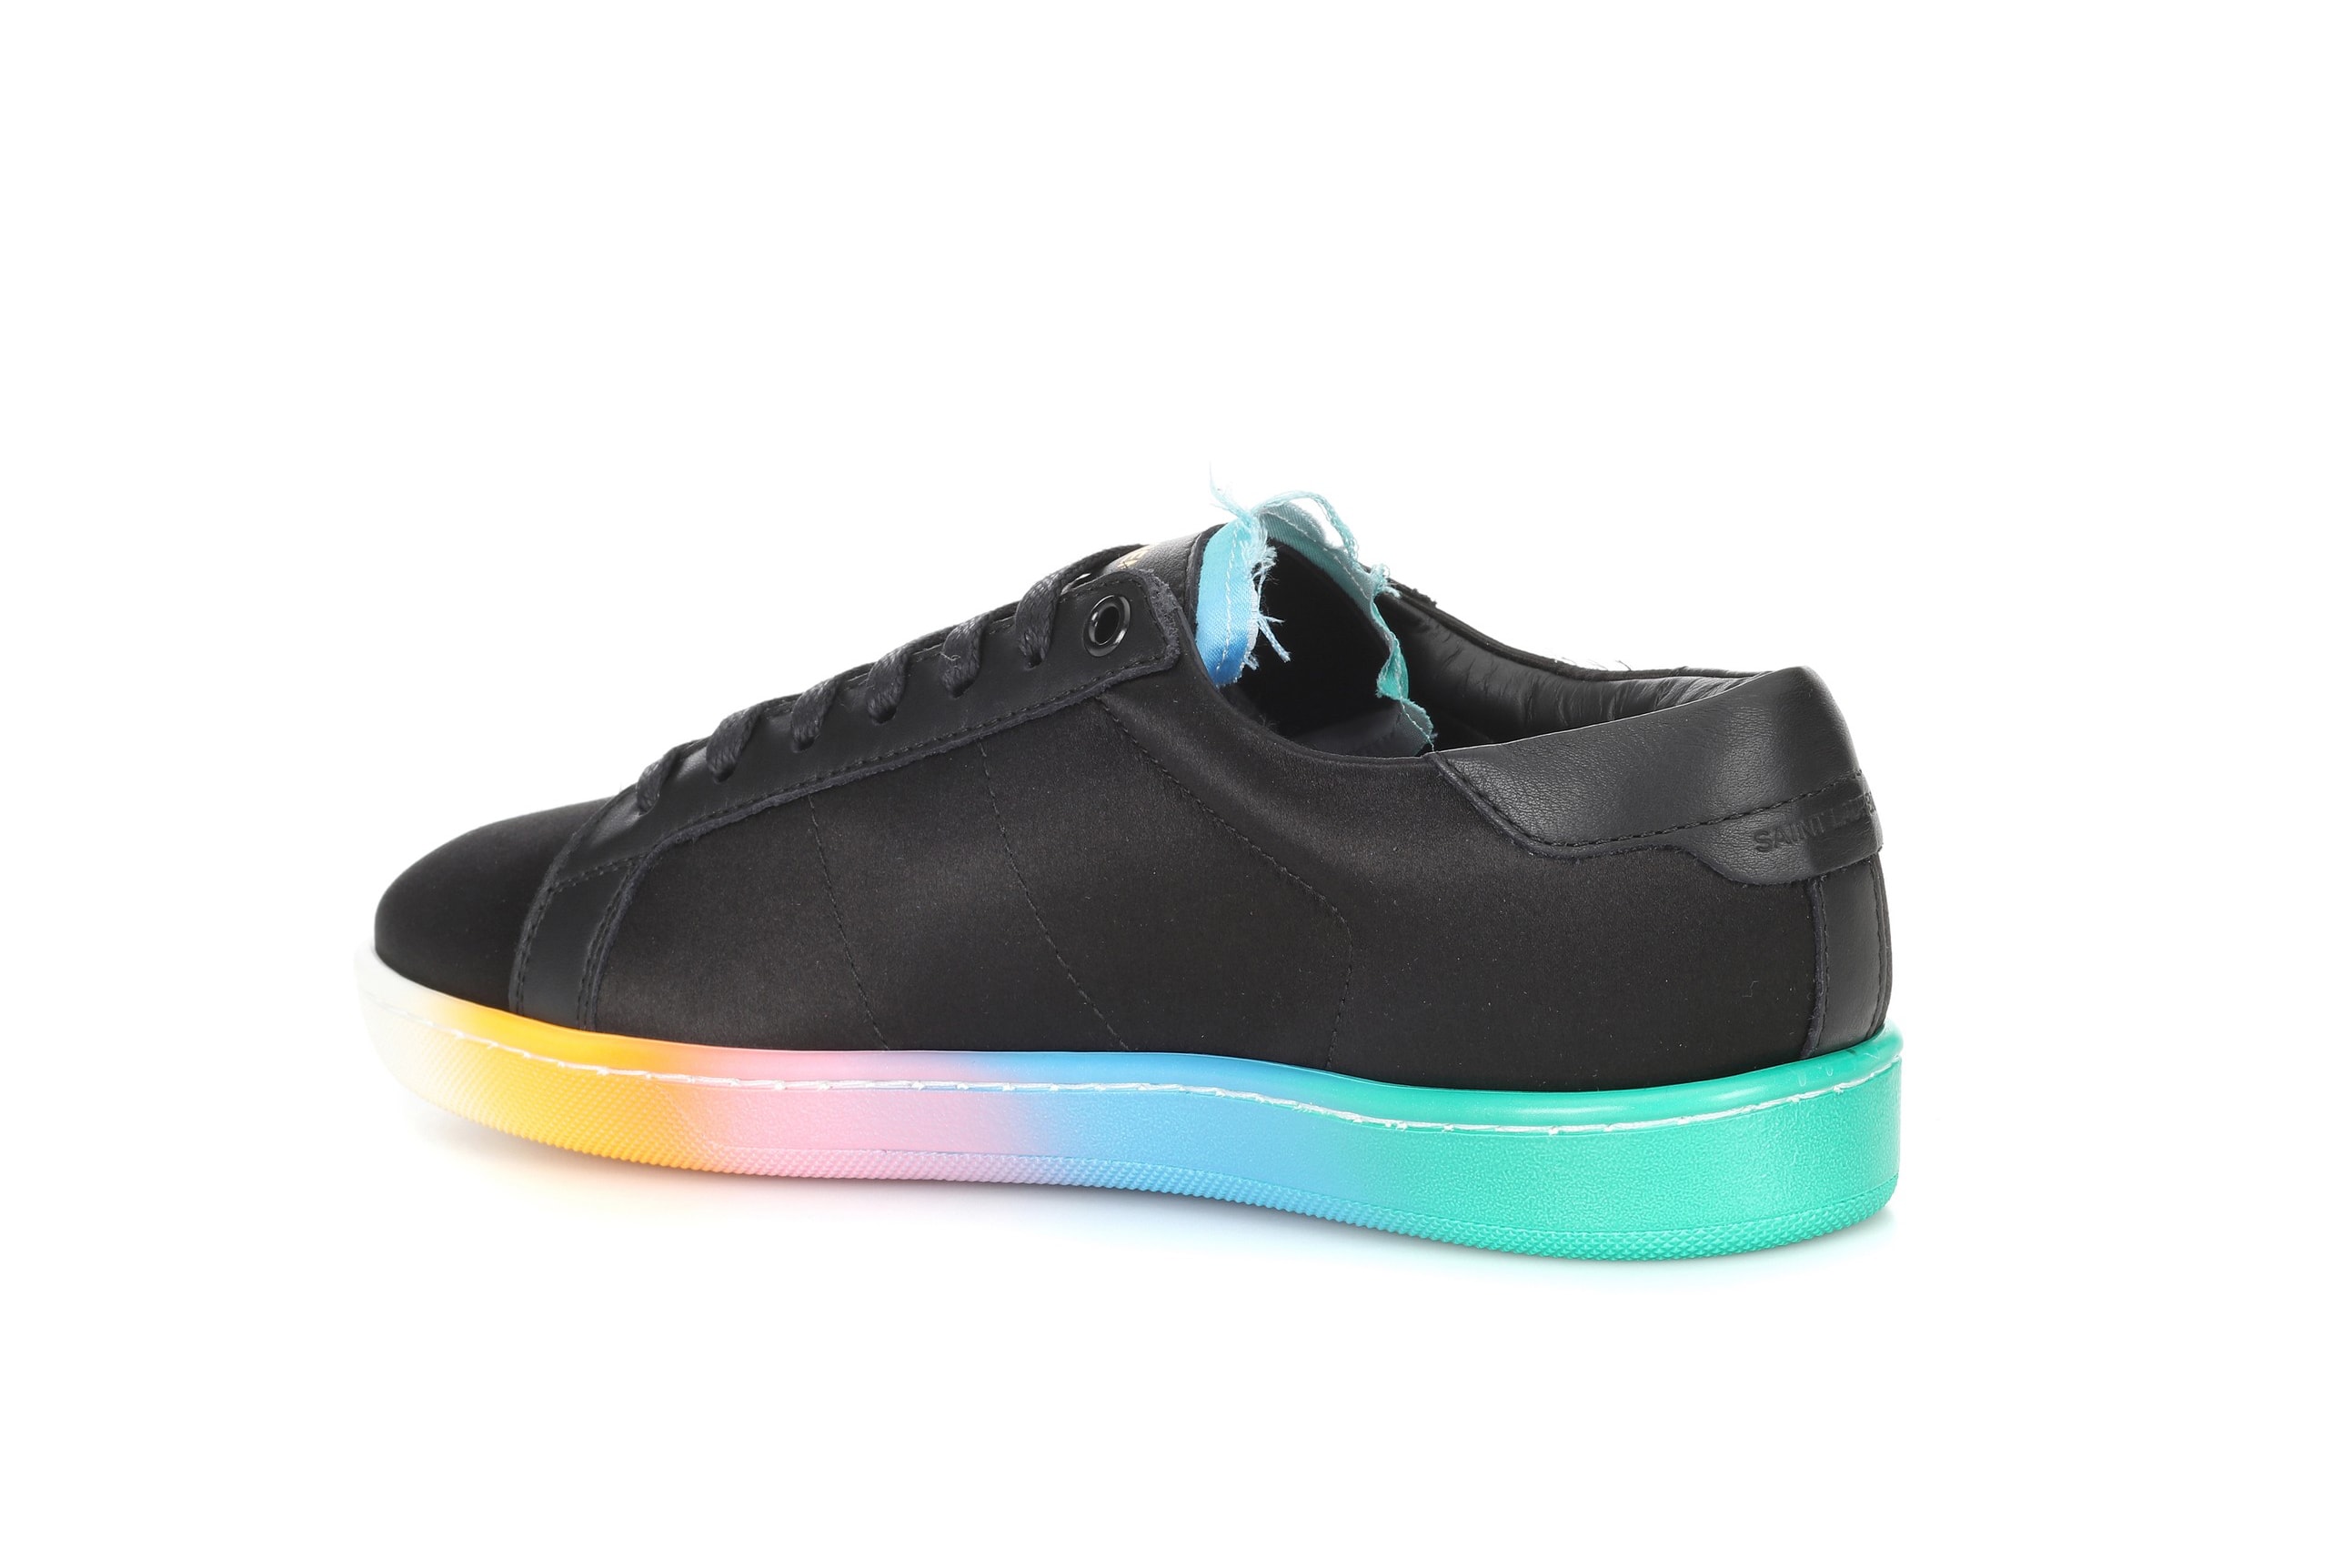 Saint Laurent Black Leather Satin Rainbow Sole Sneaker Spring Summer Silhouette Blue Pink White Yellow